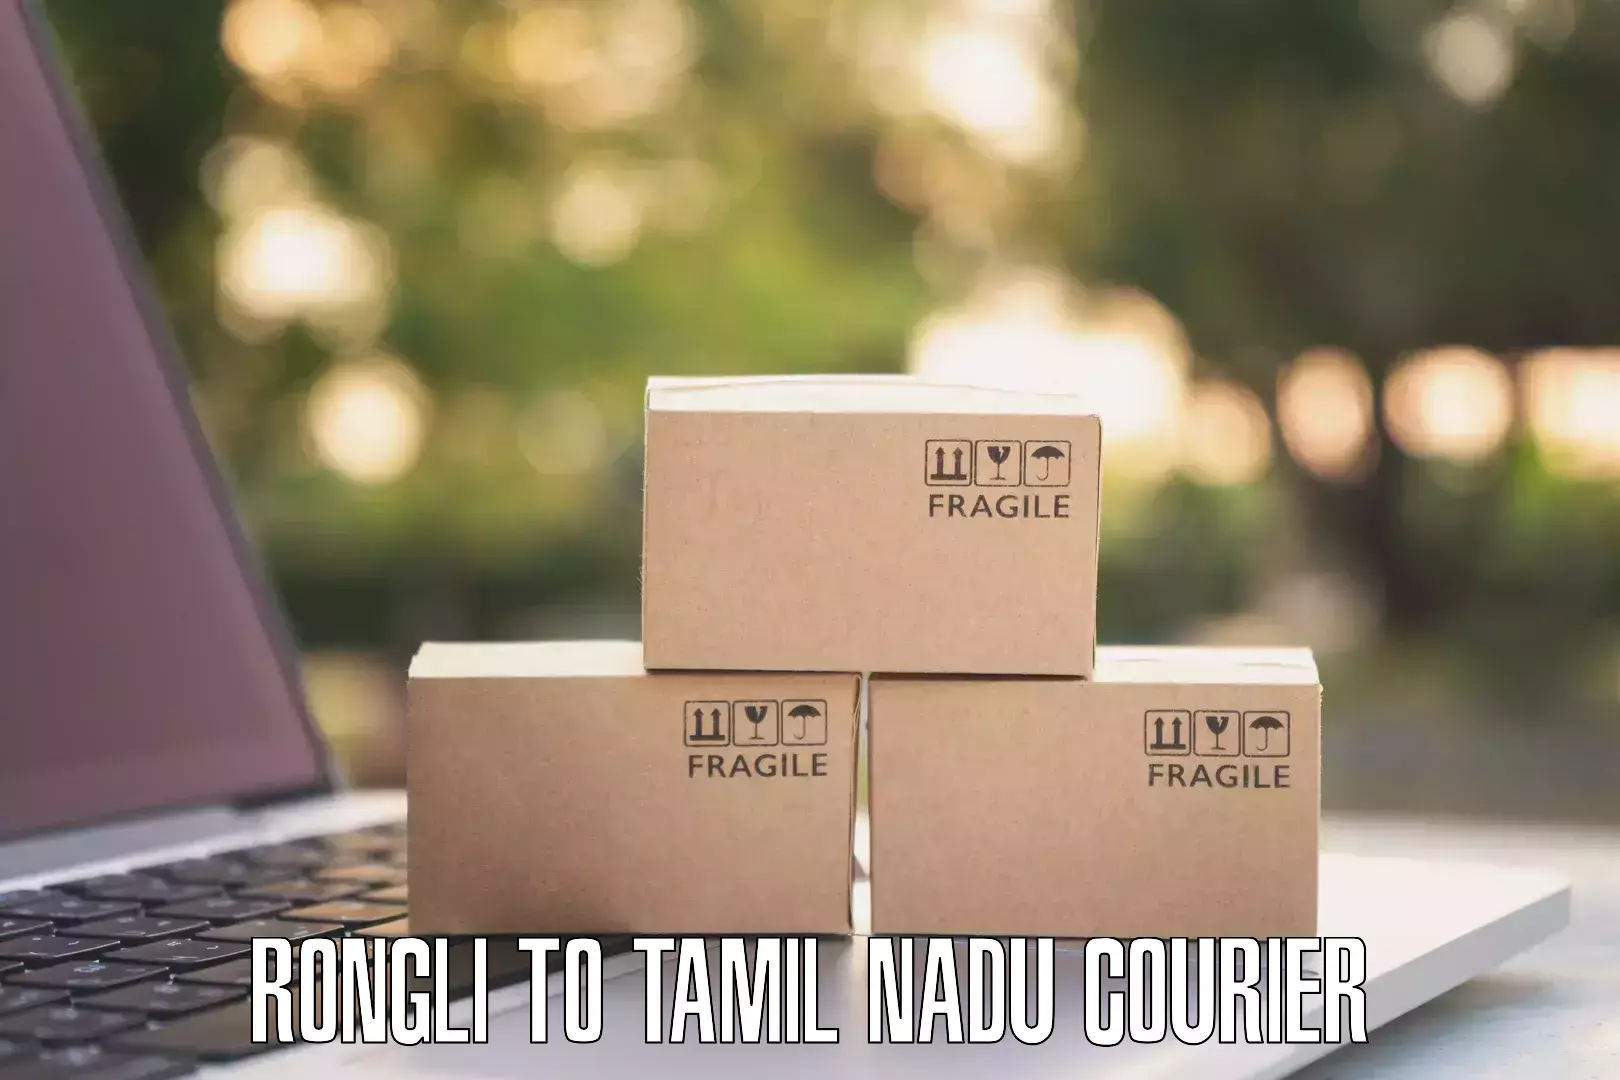 Urban courier service Rongli to Tamil Nadu